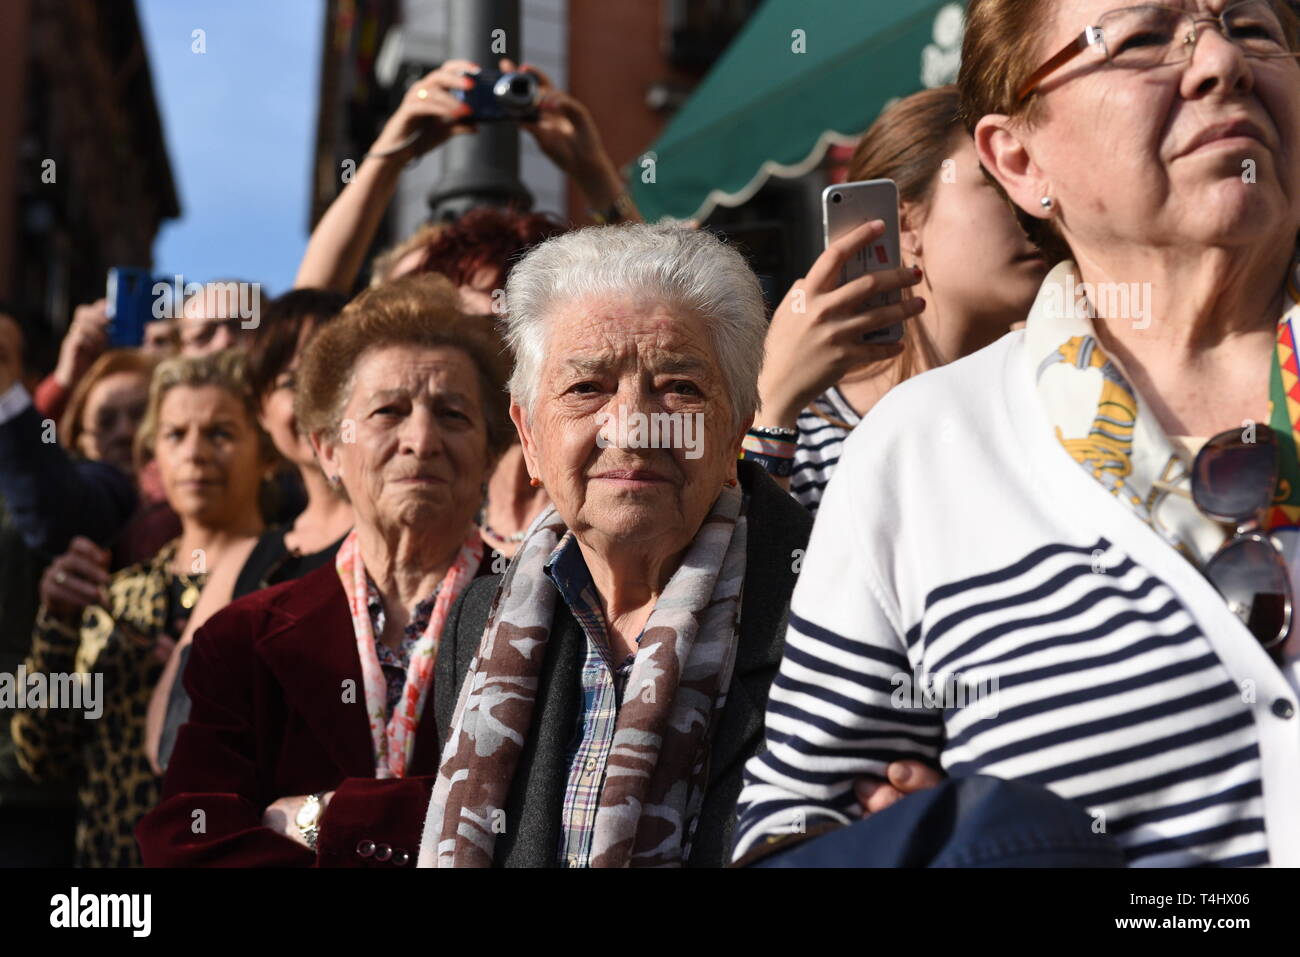 Madrid, Madrid, Spain. 16th Apr, 2019. Faithful are seen during the 'Cristo de Los Alabarderos' procession in Madrid.Cristo de Los Alabarderos procession, also known as the procession of Spanish Royal Guard, took place on the Holy Tuesday and in Good Friday in Madrid. Penitents carried a statue of Jesus Christ from 'De las Fuerzas Armadas' church to 'Real' palace in central Madrid and on Good Friday penitents will march in reverse, this has been celebrated since 1753 and it is one of the most important processions of the Holy Week in Madrid. (Credit Image: © Jorge Sanz/SOPA Images via ZUMA Stock Photo